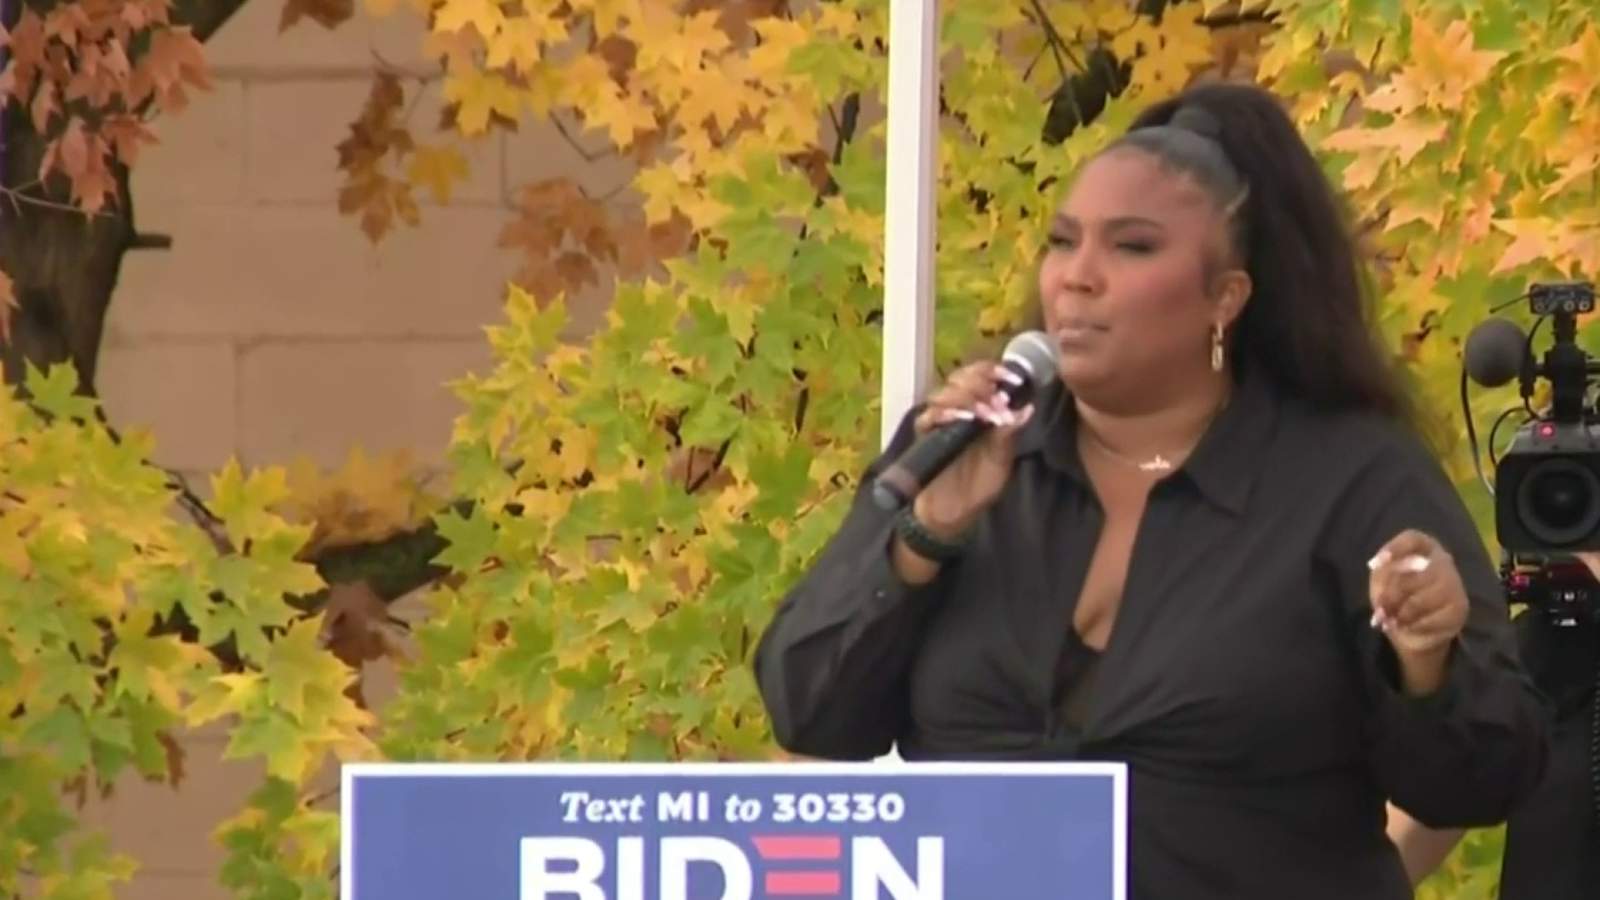 Detroit native and music star Lizzo campaigns for Biden-Harris in city